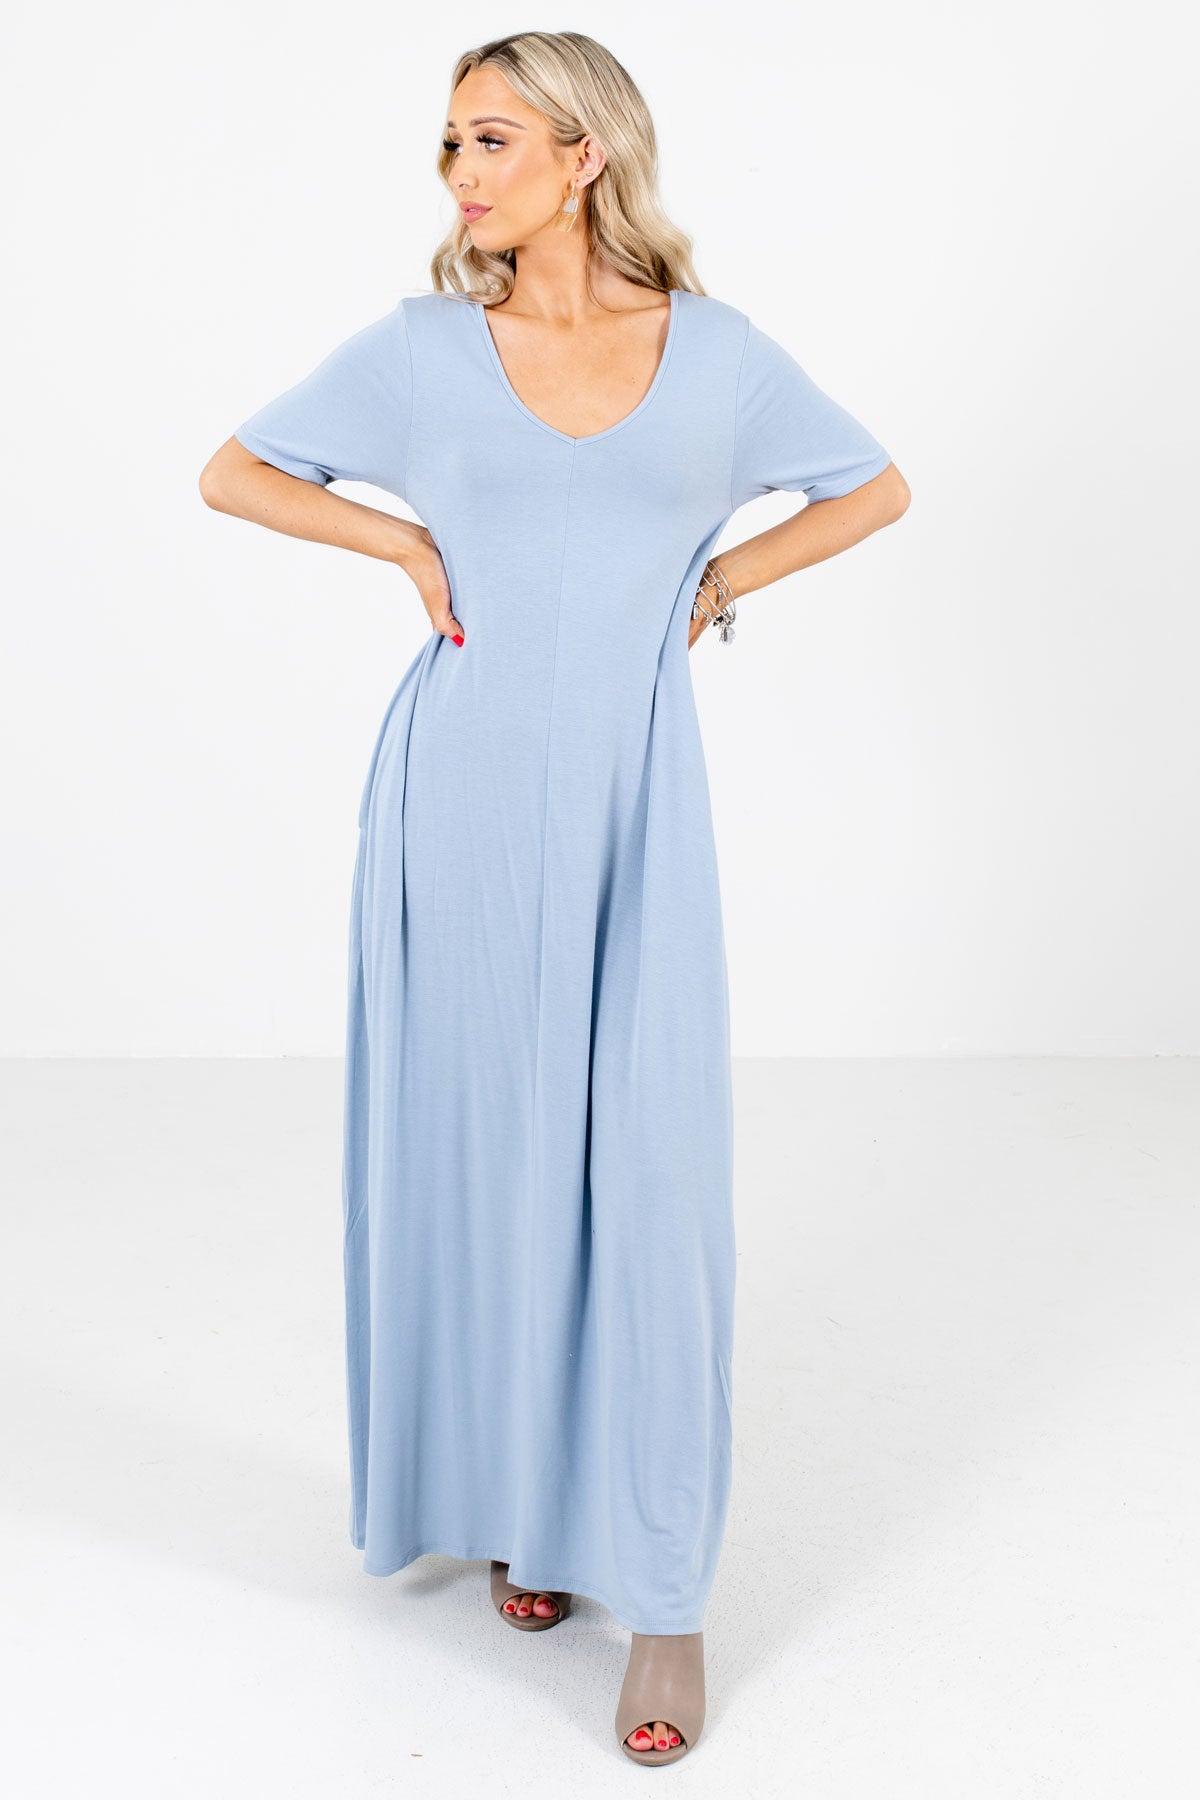 Blue Casual Everyday Boutique Maxi Dresses for Women